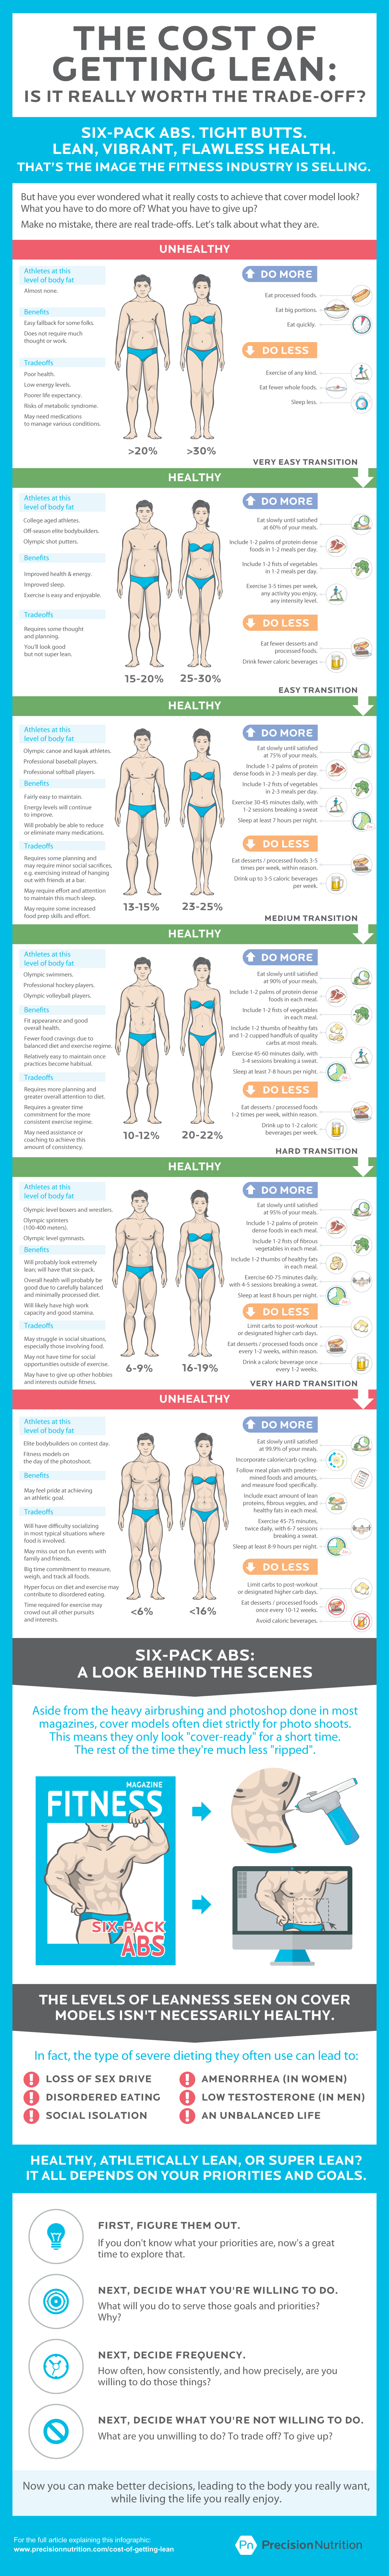 [Infographic] Here's the cost of getting lean. Is it really worth the trade-off?